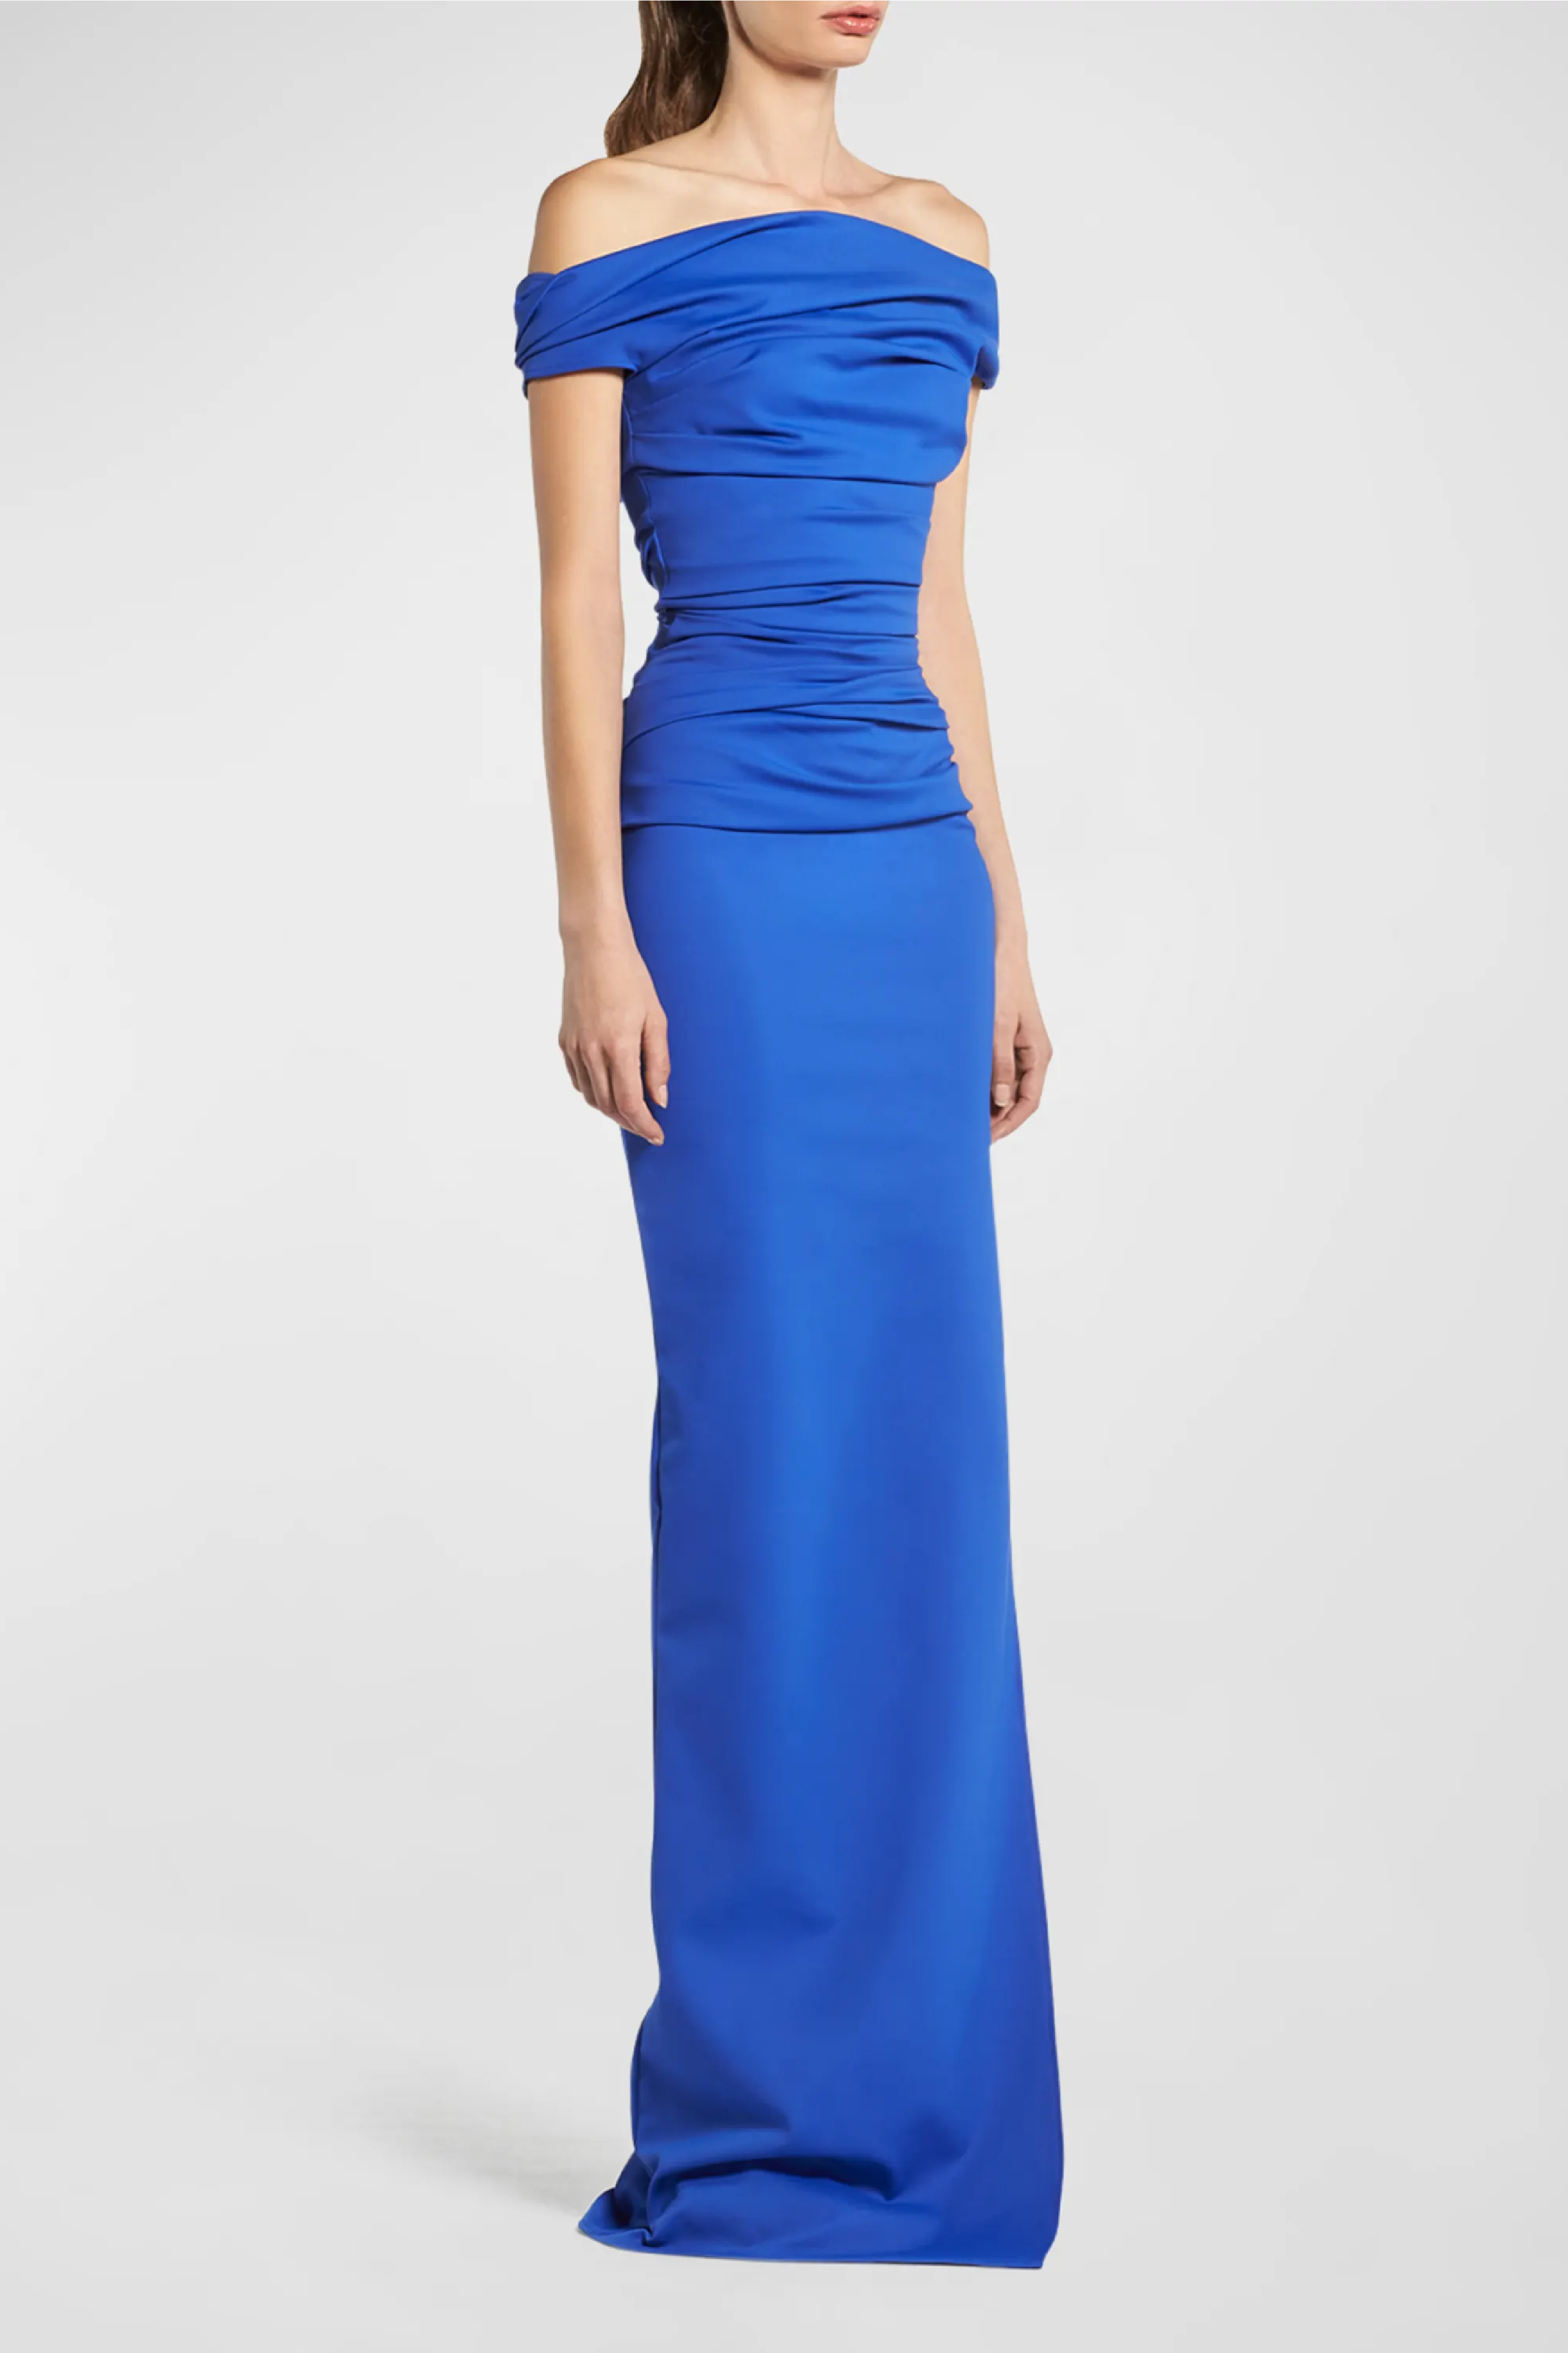 Assertion Gown in Electric